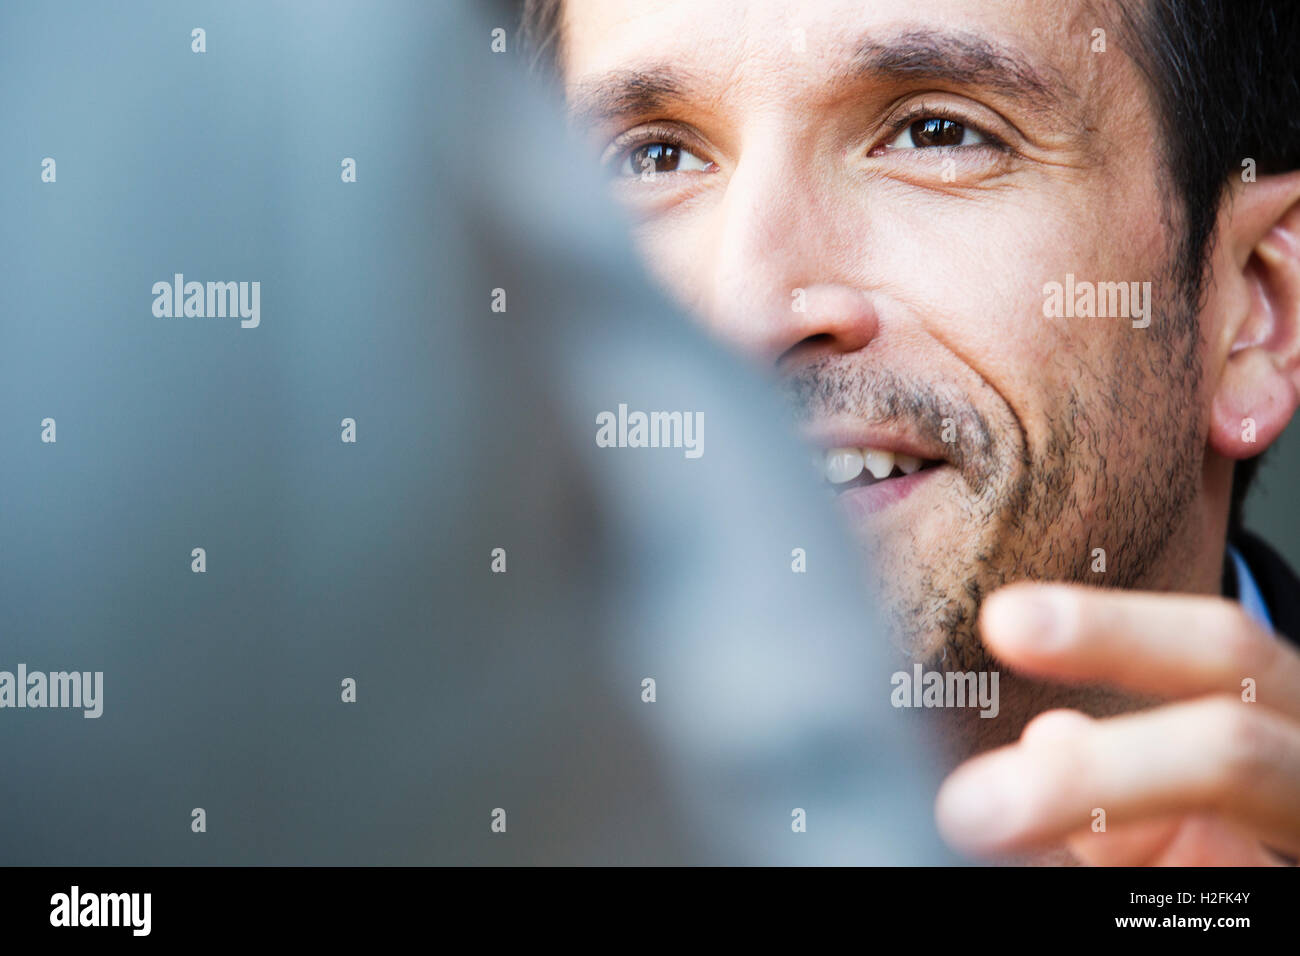 Close up of a smiling businessman, face partially obscured. Stock Photo